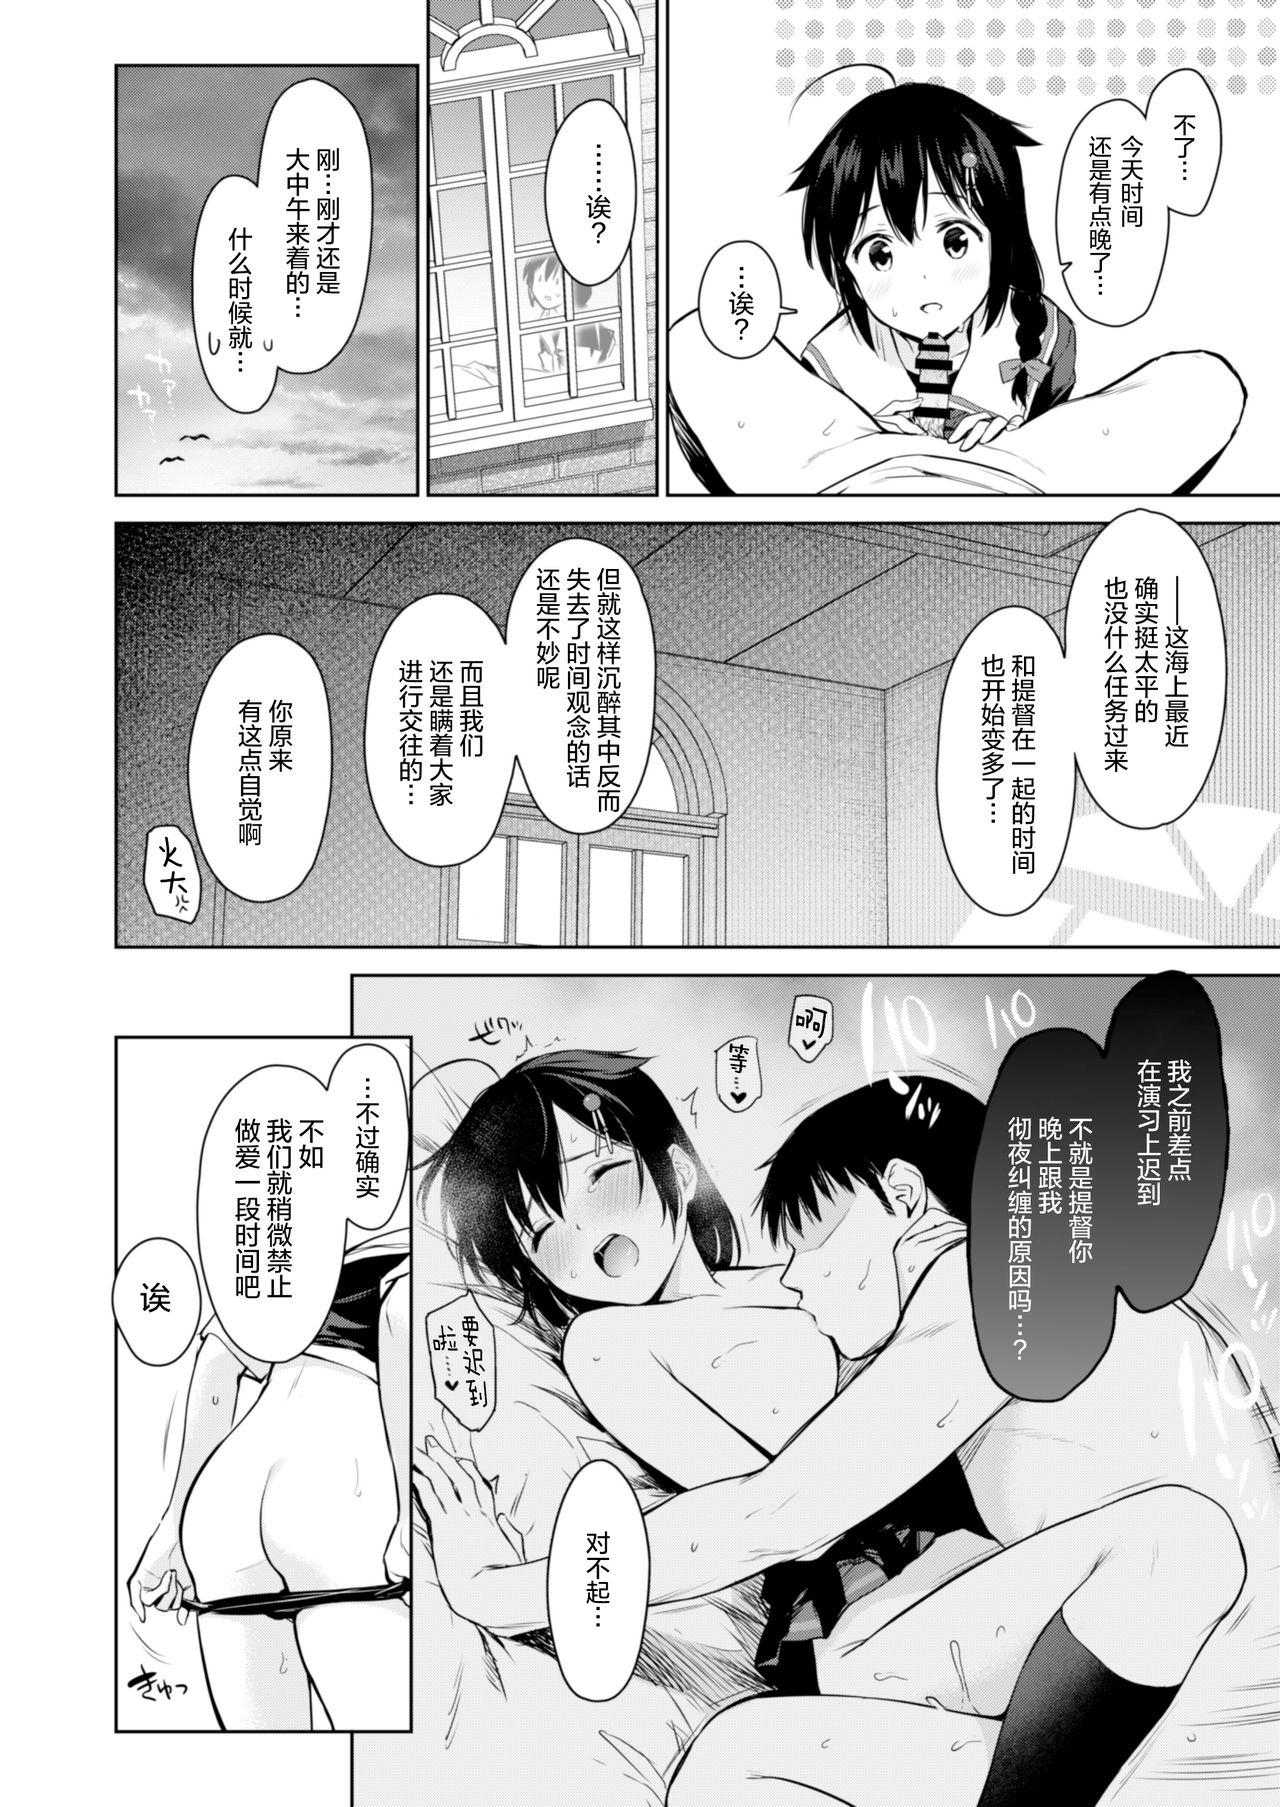 Tranny Porn Shigure once a week - Kantai collection From - Page 4